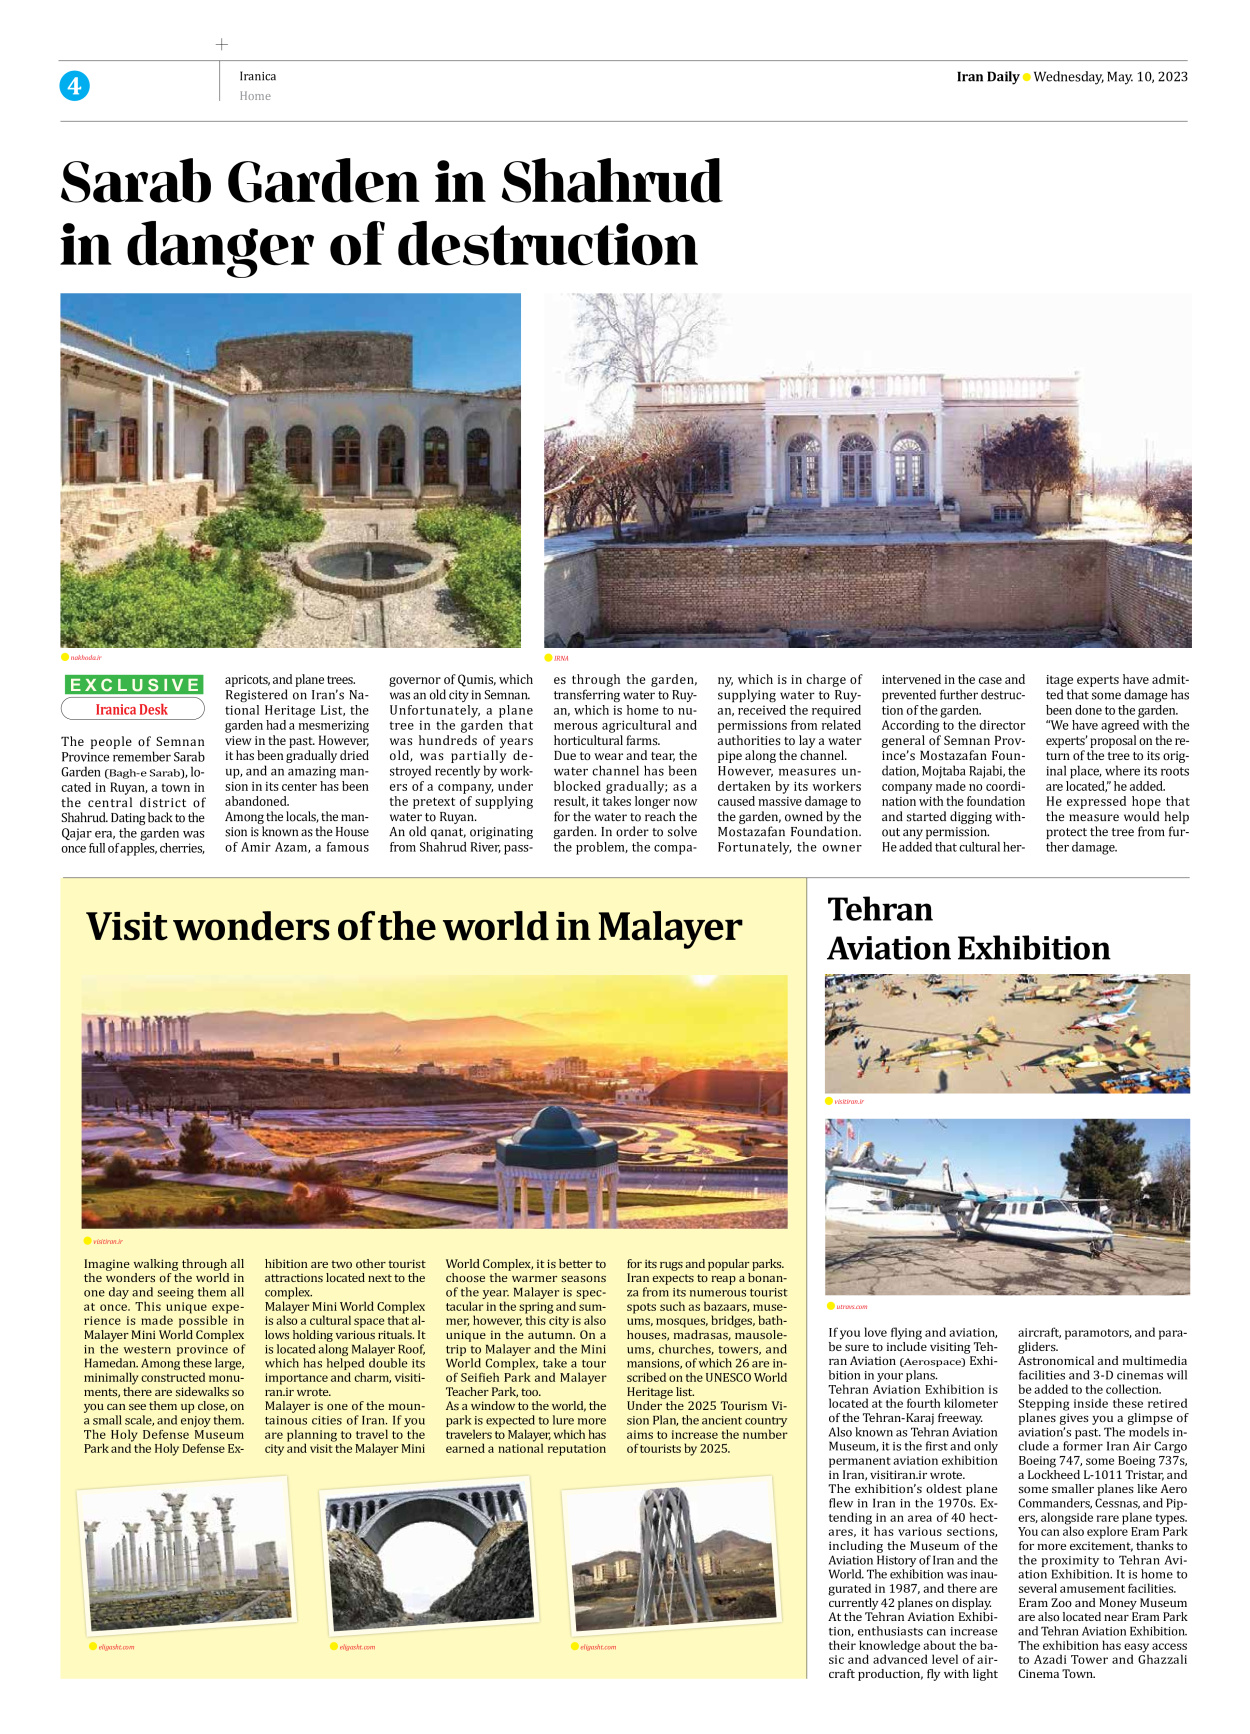 Iran Daily - Number Seven Thousand Two Hundred and Eighty Eight - 10 May 2023 - Page 4